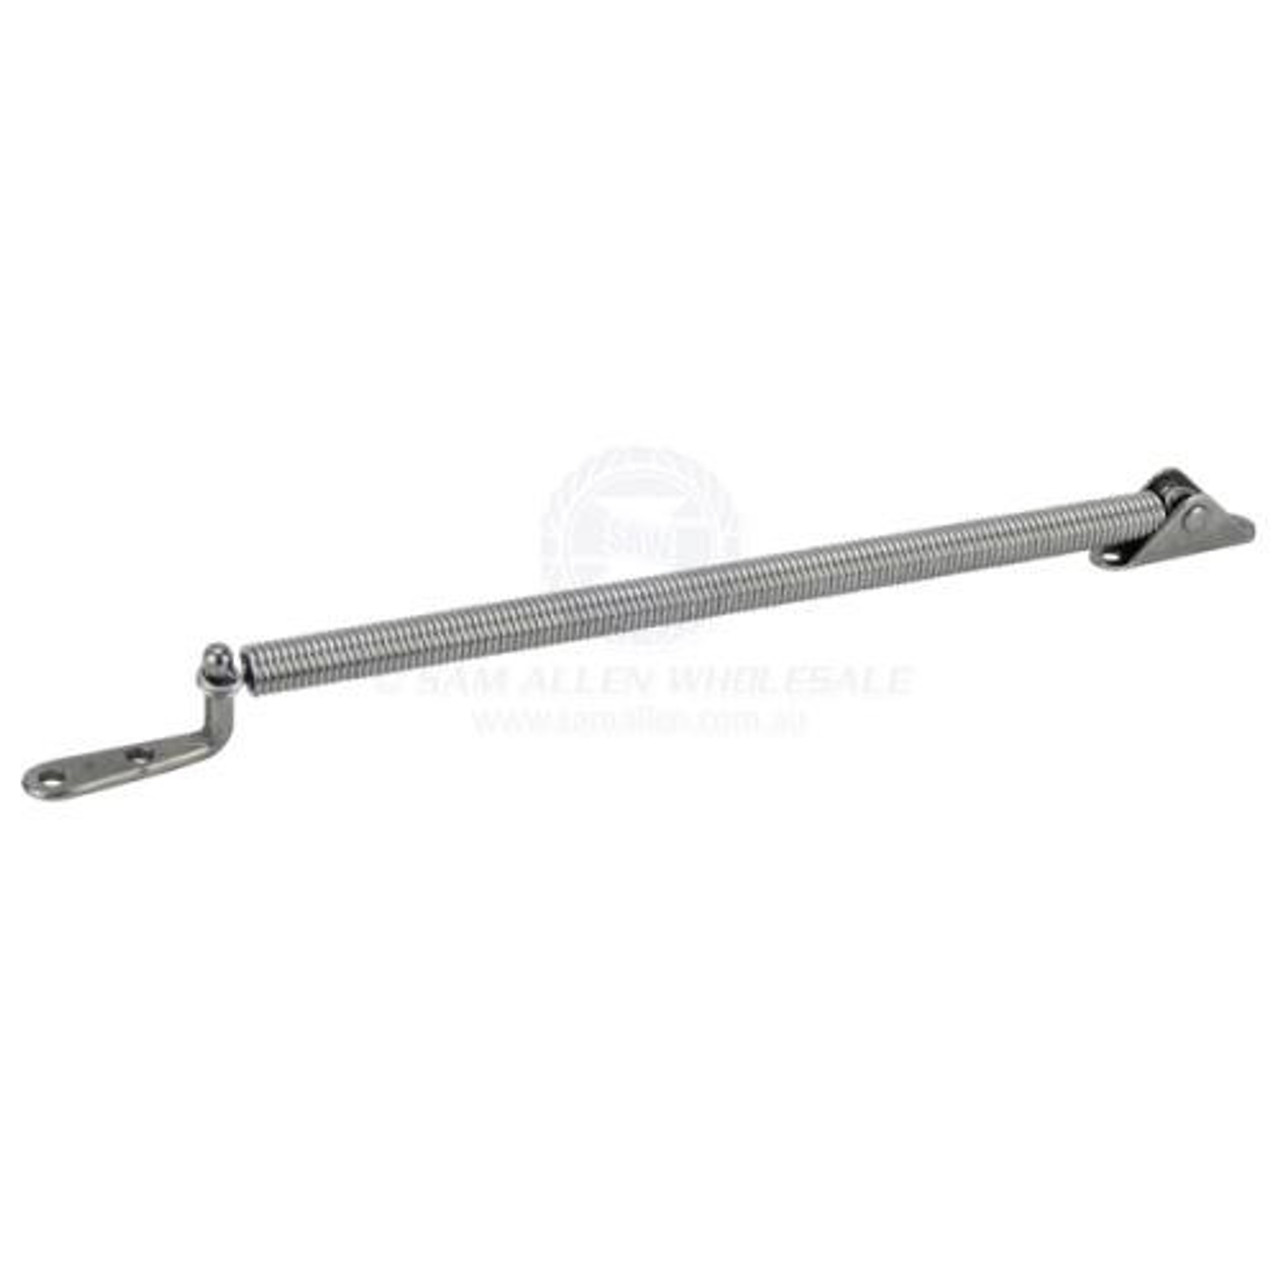 HATCH STAYS - SPRING - STAINLESS STEEL 235MM